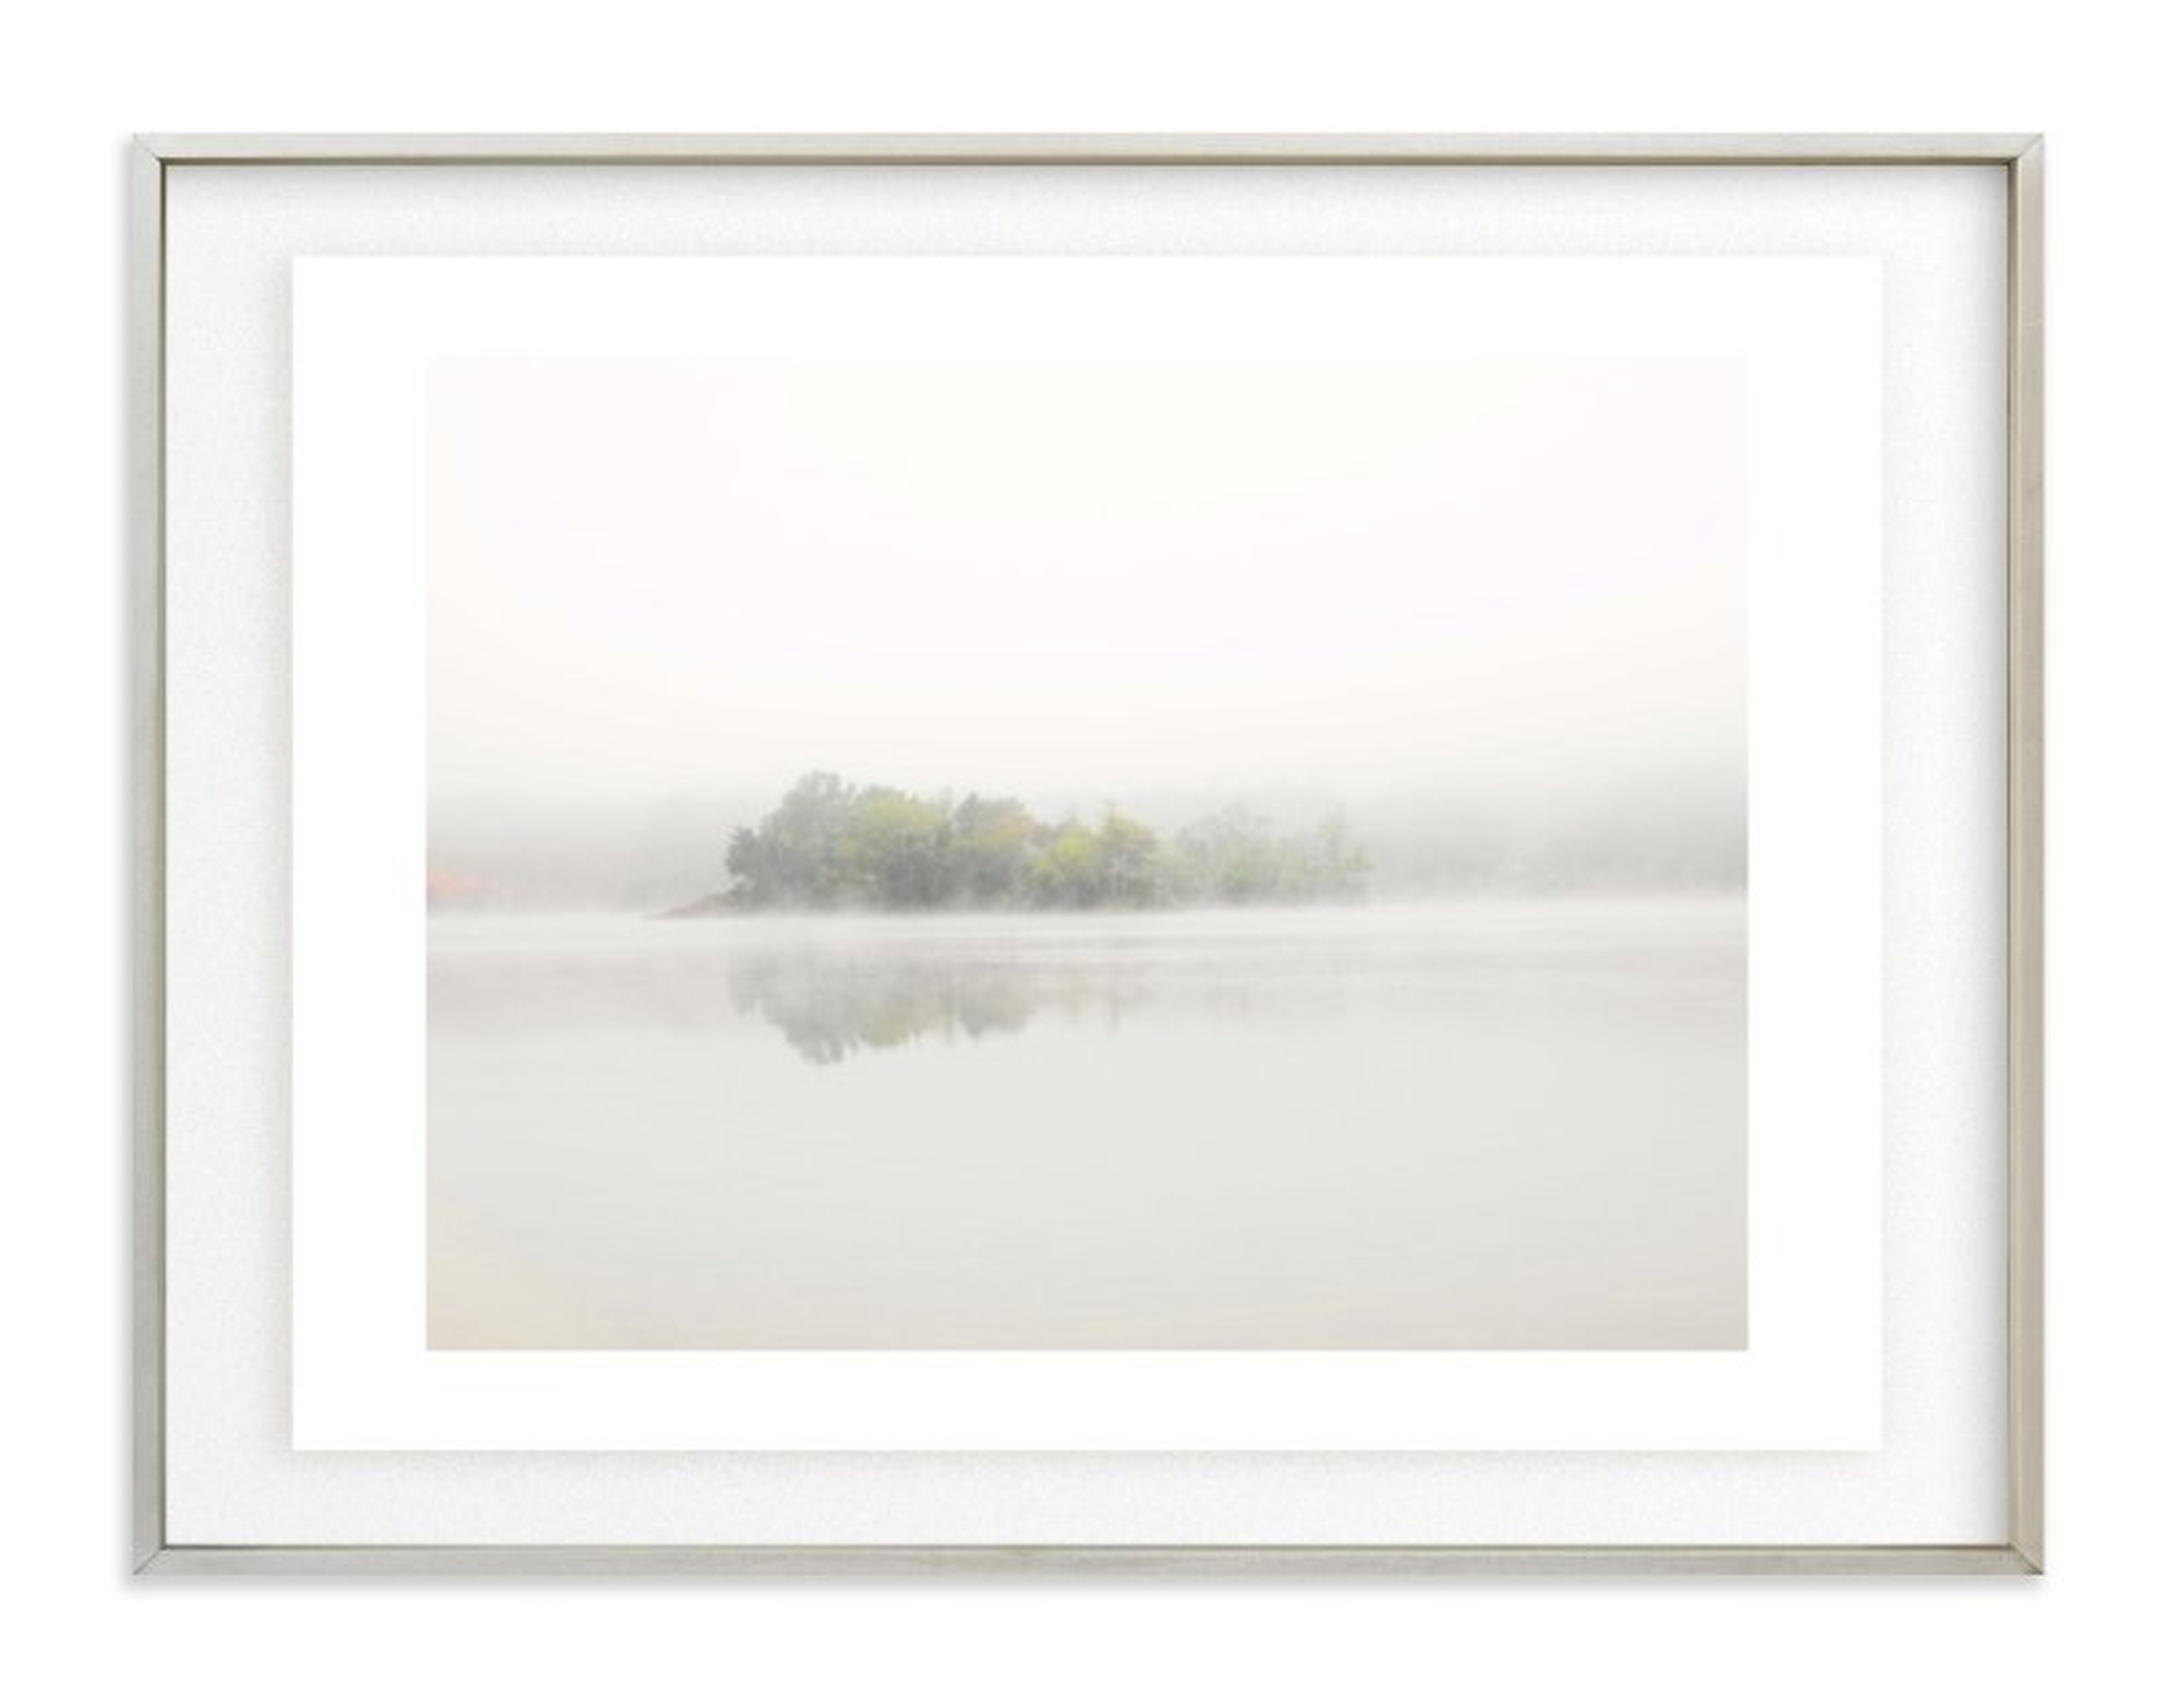 The Island - 40" x 30", float mount, champagne silver frame - Minted